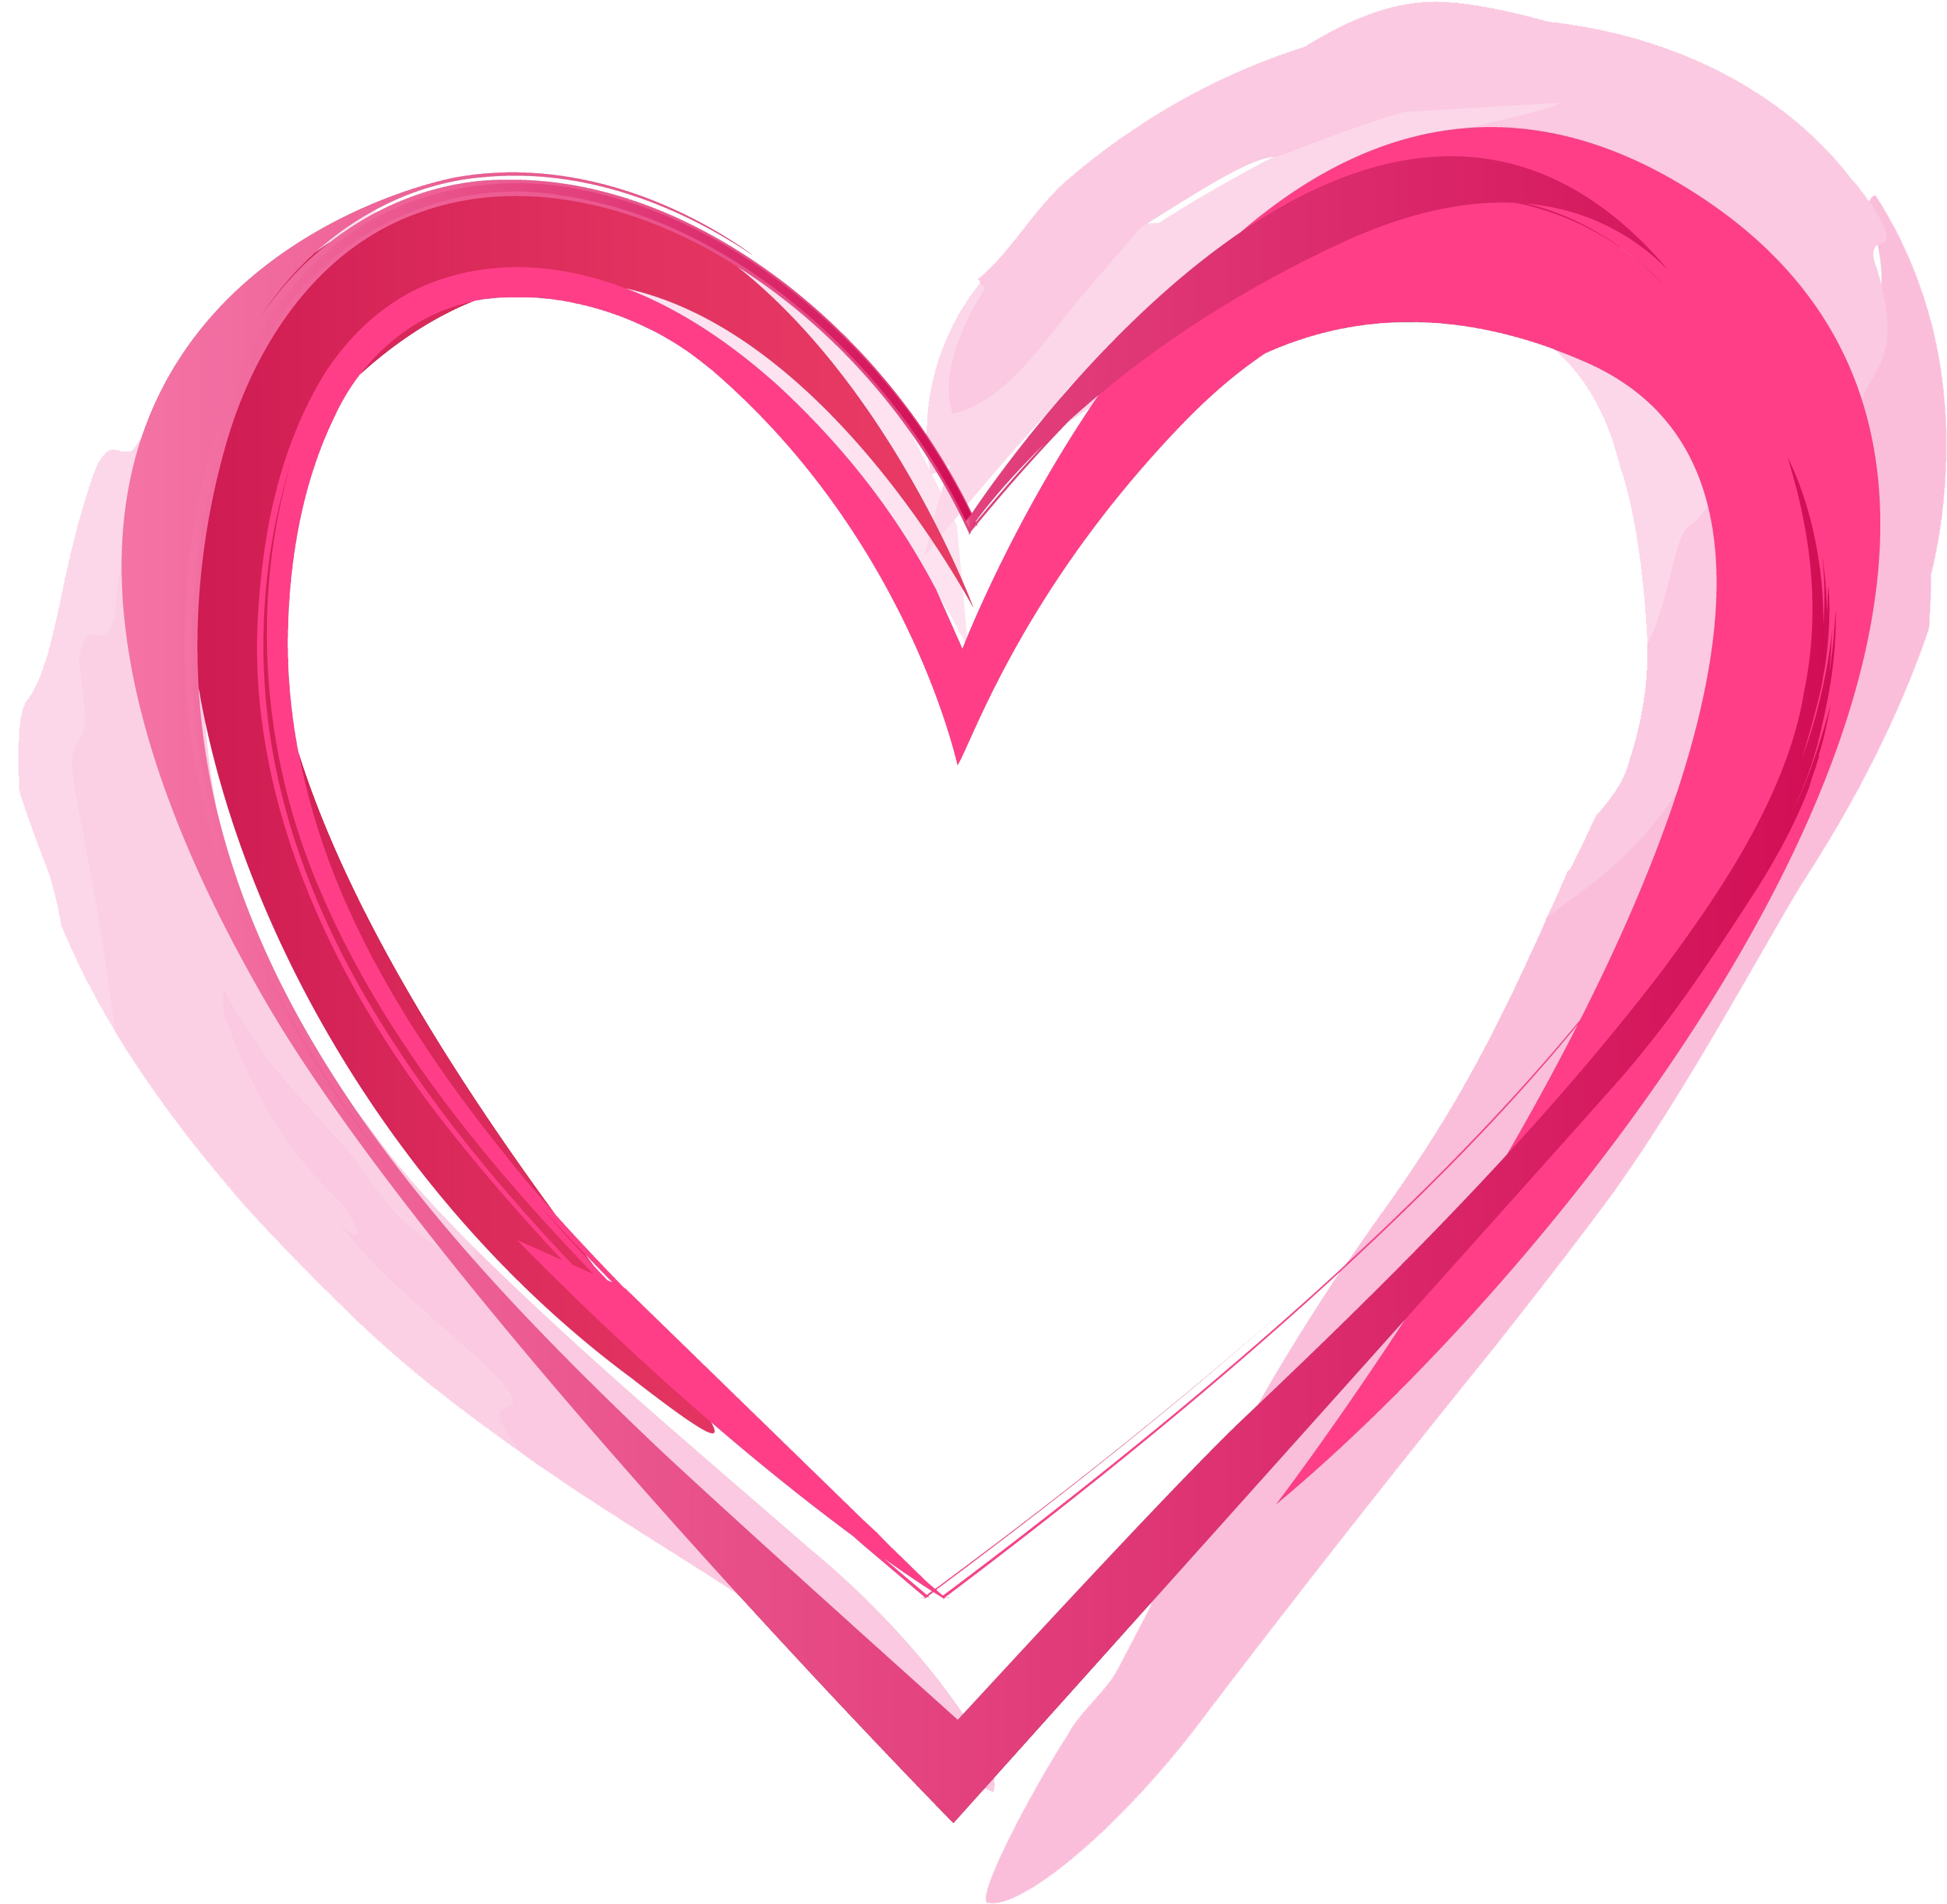 Download Png Image - Transparent Background Heart Clipart (3000x3000)